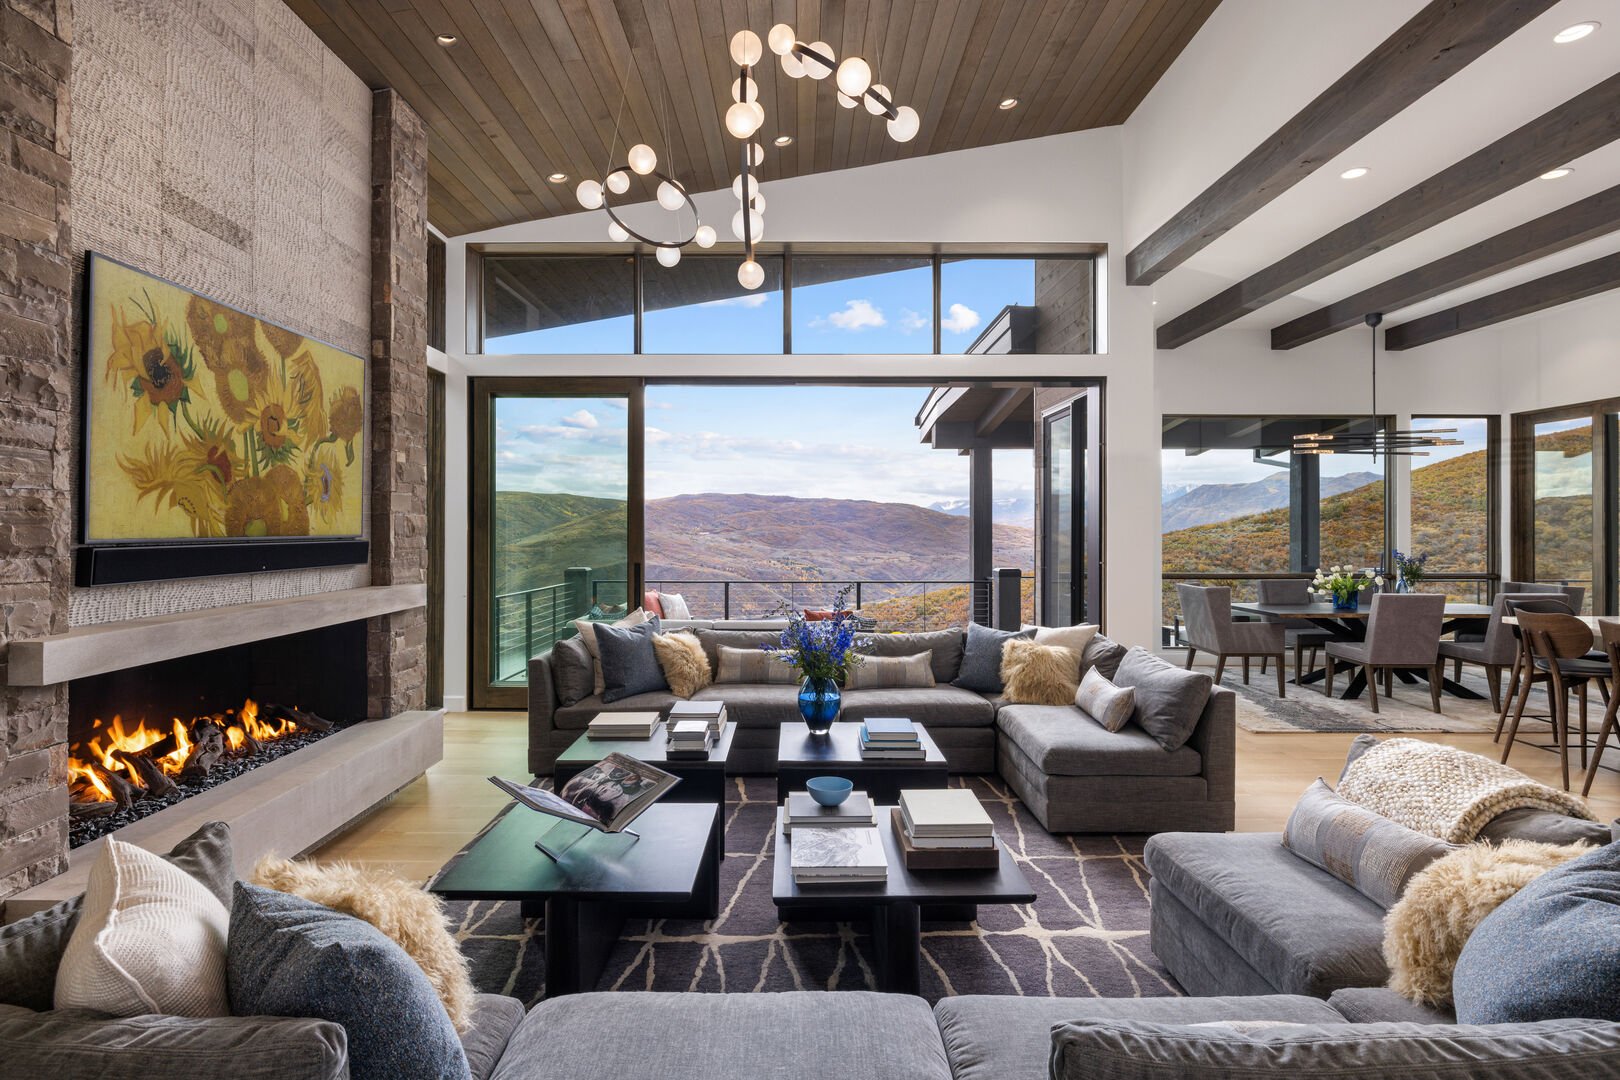 Spacious living room with stunning views.